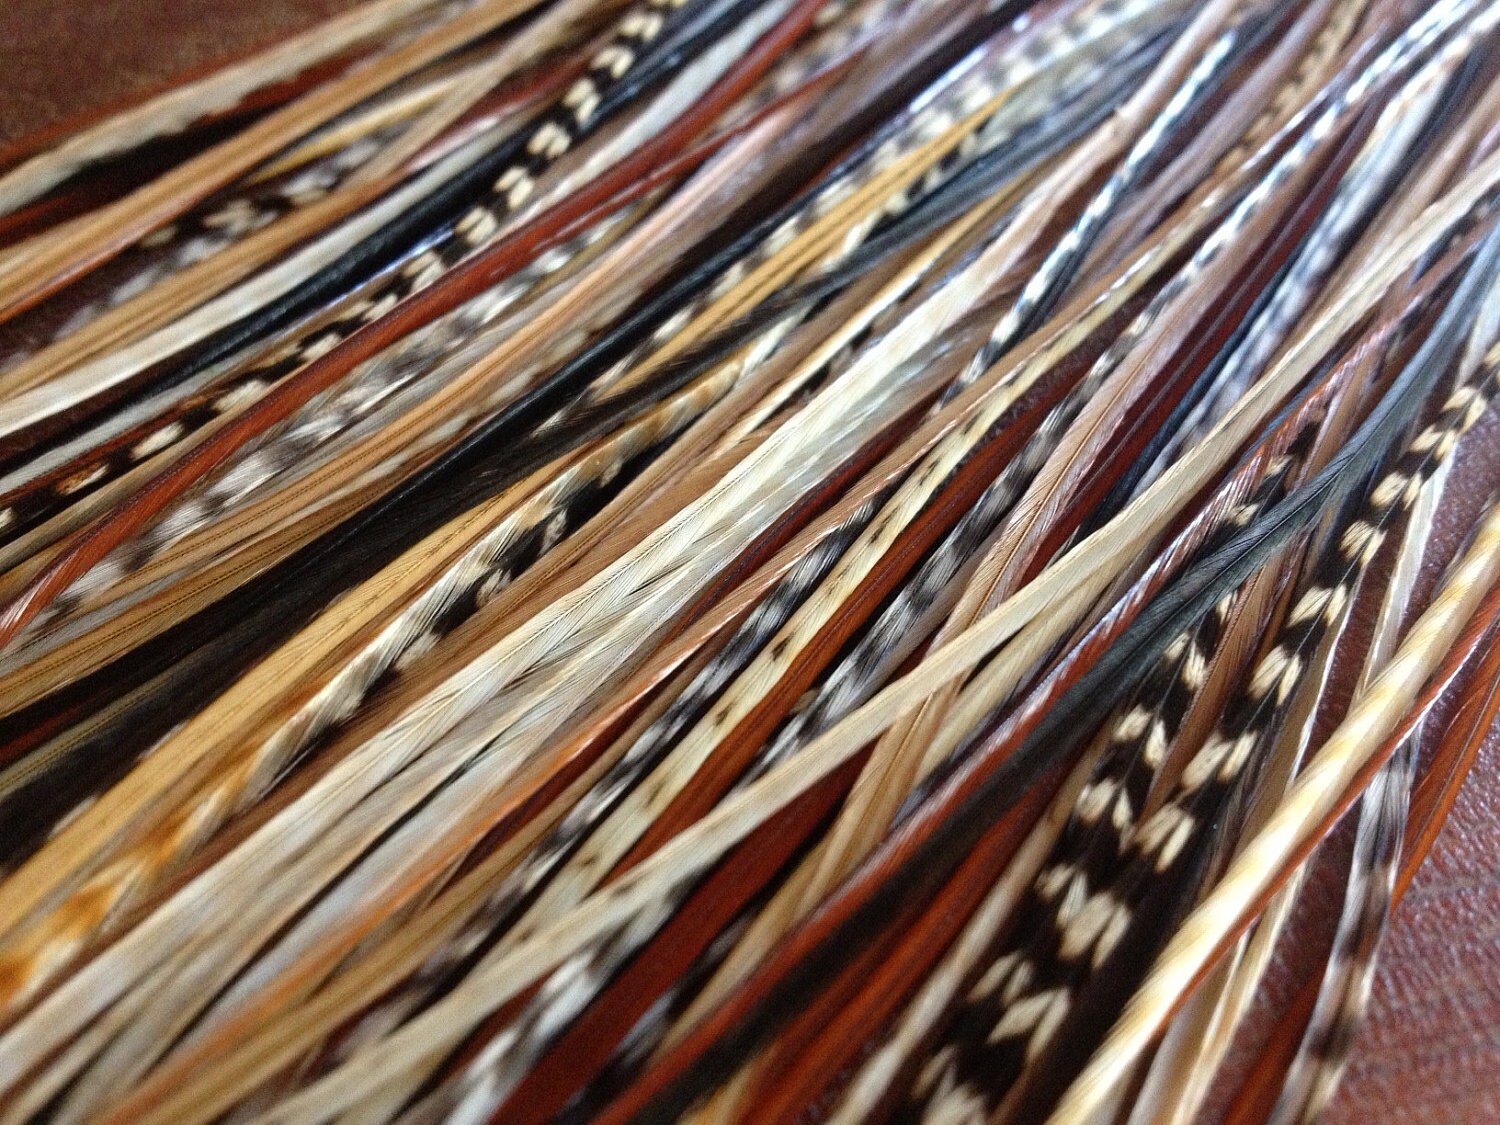 Grizzly Rooster Feathers 7 Cm to 12 Cm 2.75 to 4.72 Copper Gray Black and  White Feathers Zebra Pattern Feathers for Jewelry Making 